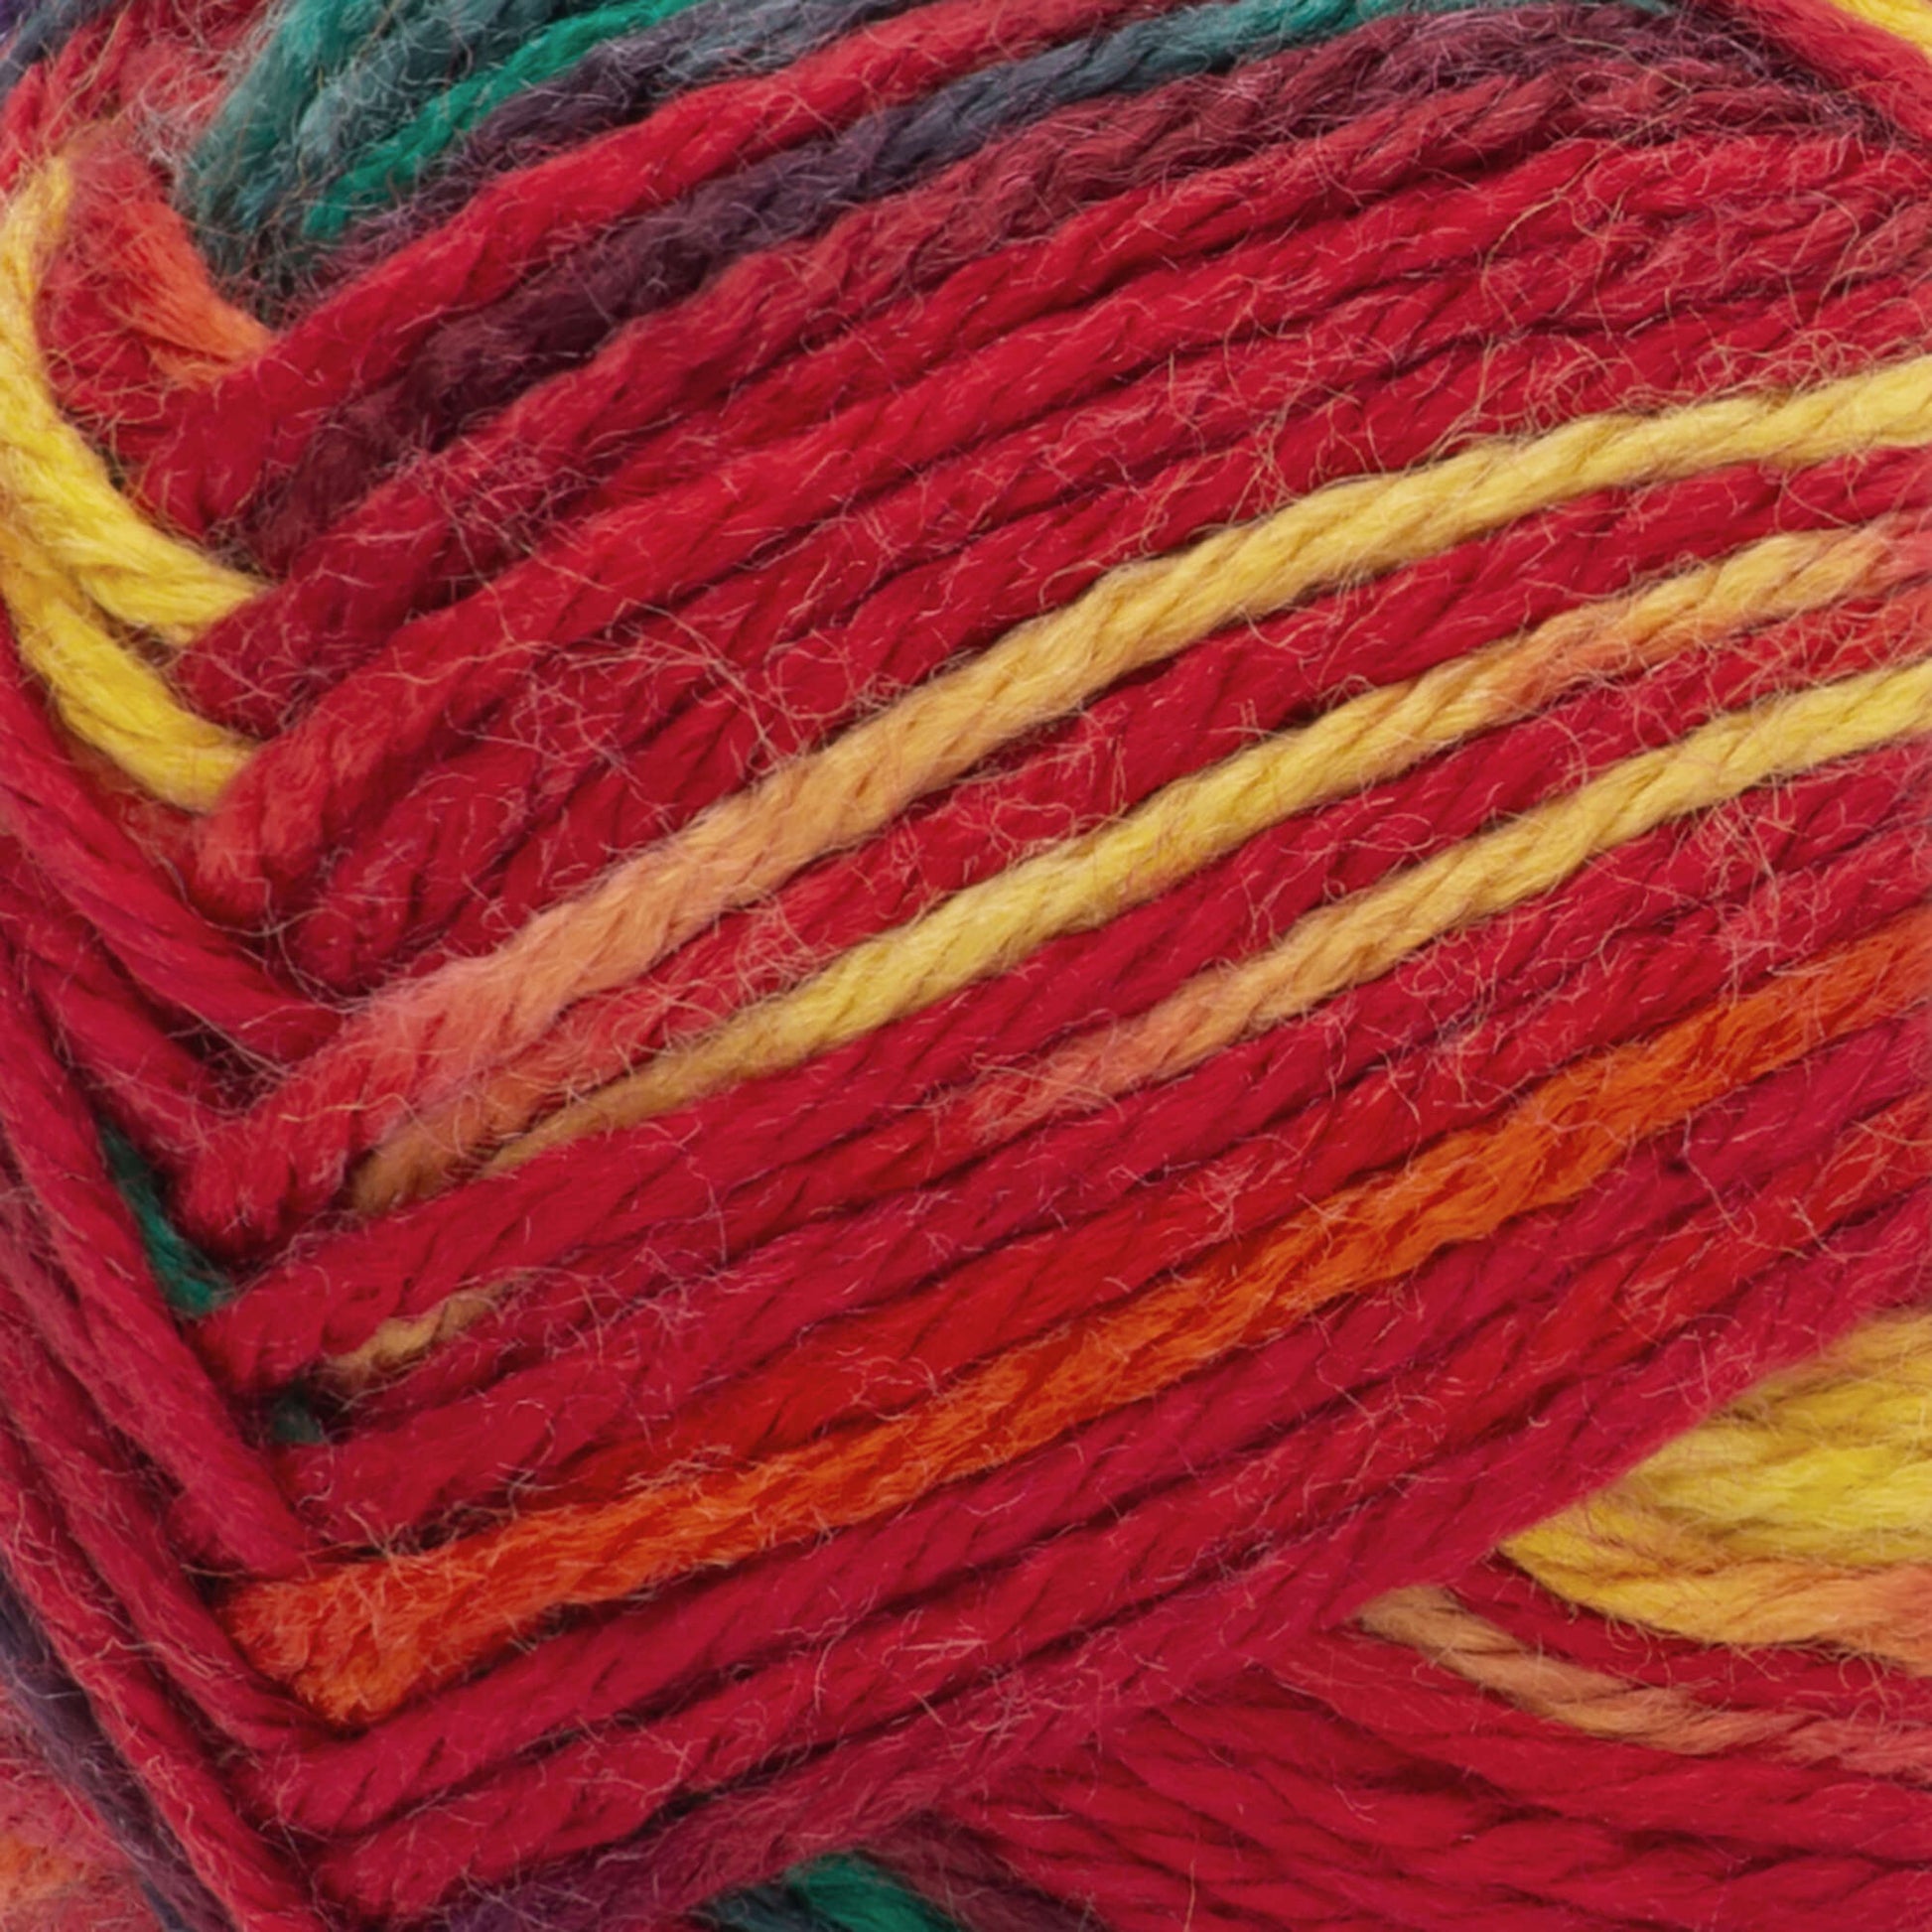 Red Heart Gumdrop Yarn - Discontinued shades Popsicle